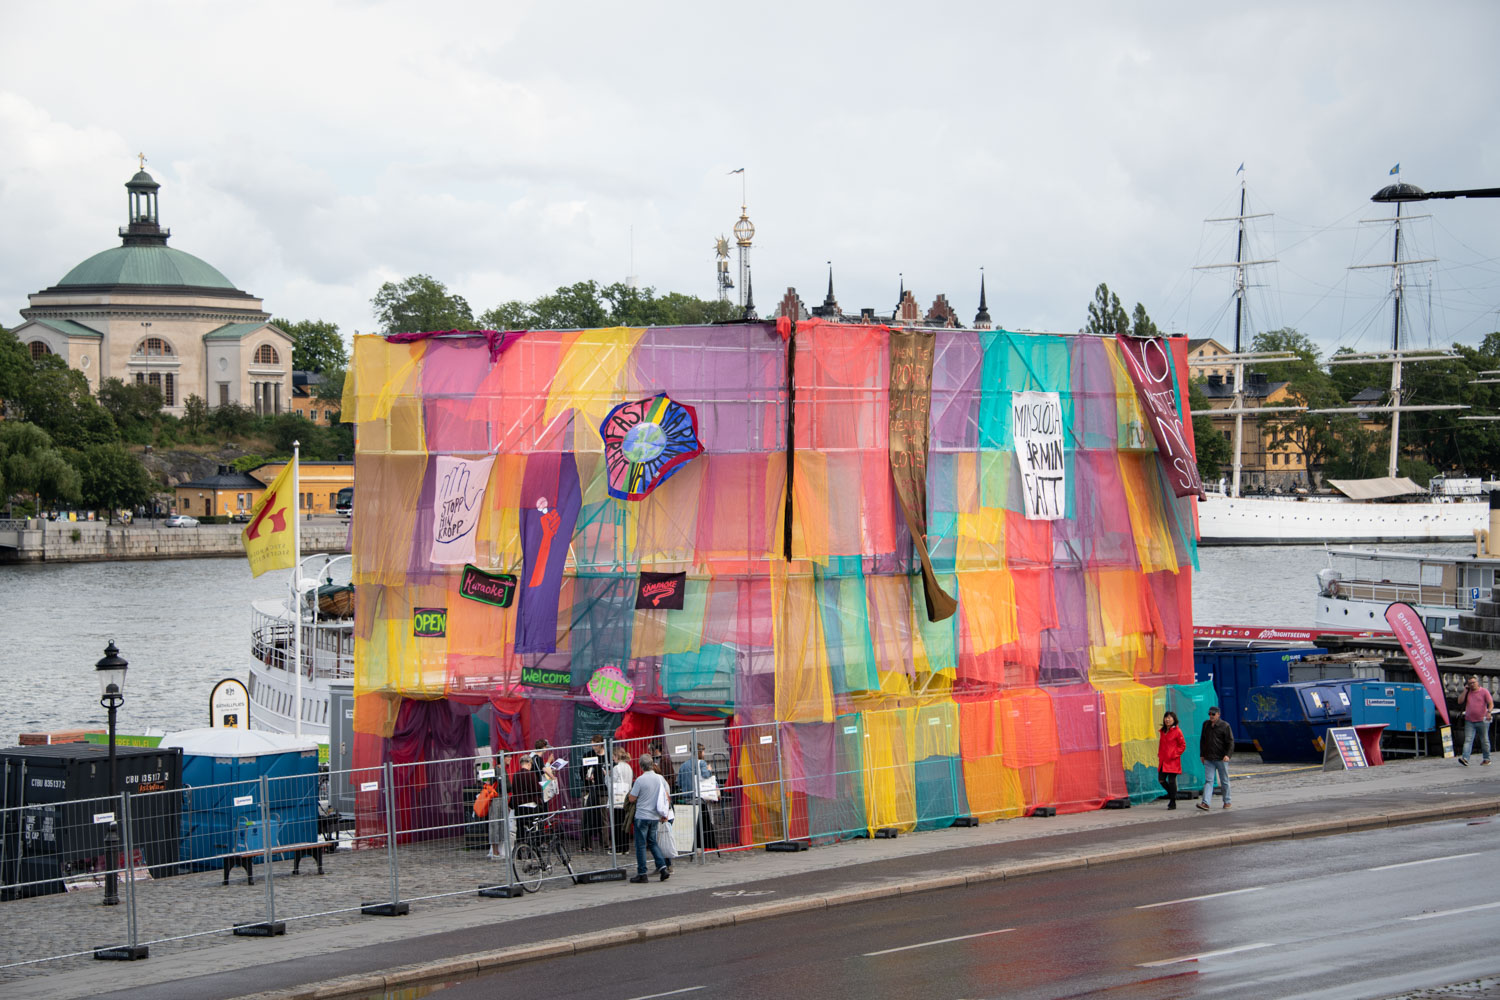 View of the water in the center of Stockhlm, with a colourful artwork placed just by the water.